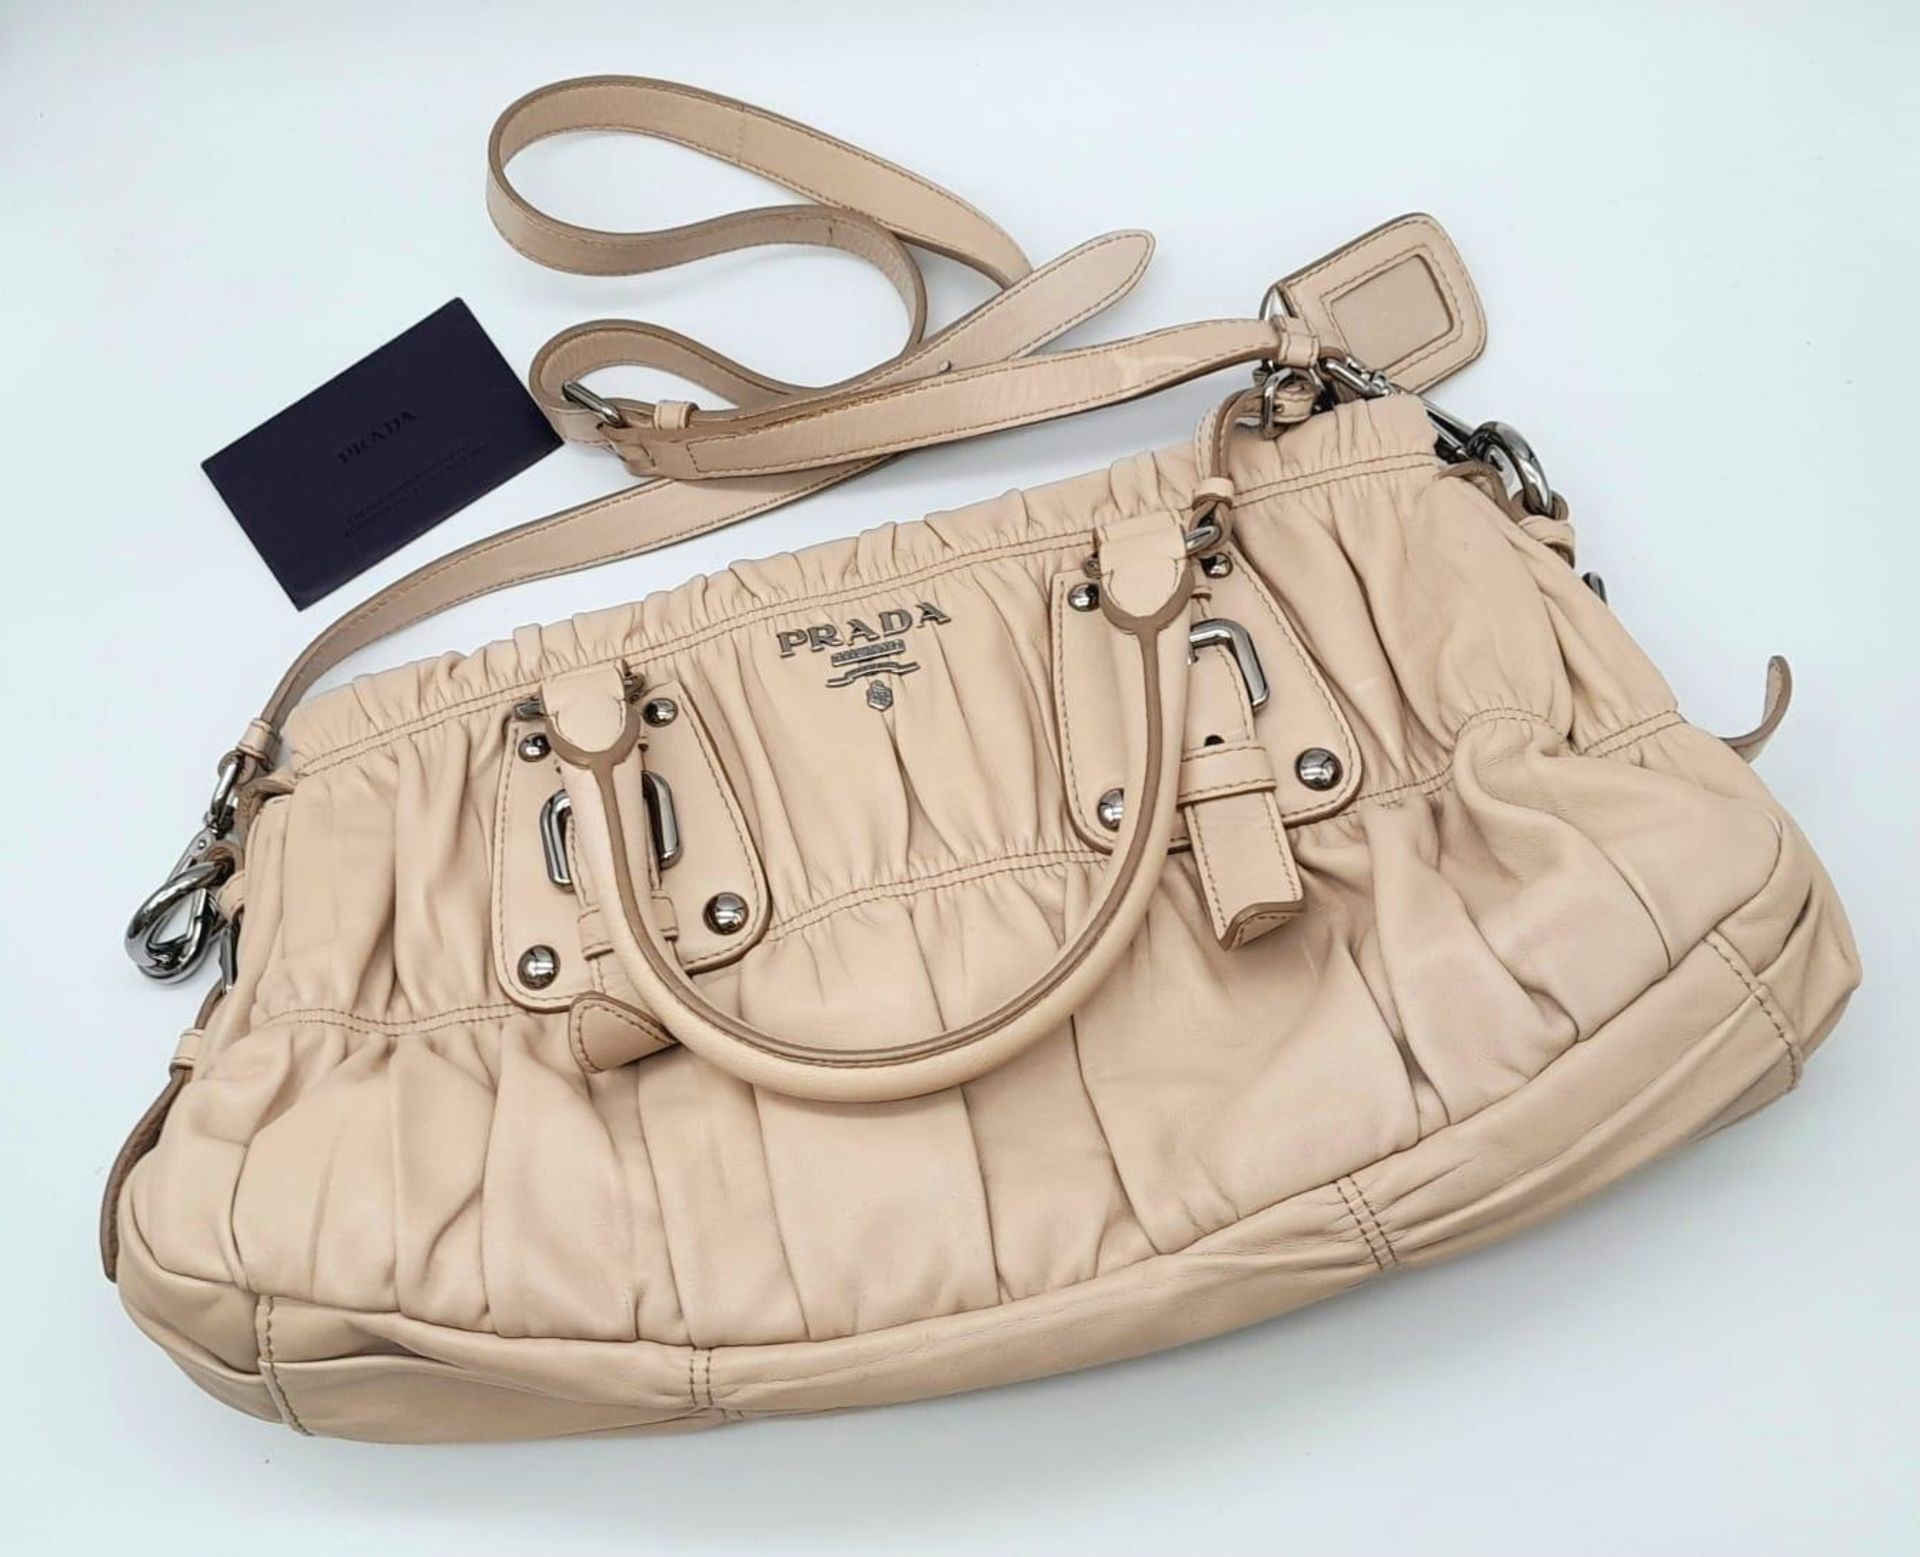 A PRADA BEIGE NAPPA LEATHER GAUFRE POMICE TOTE BAG. SILVER TONE HARD WEAR INCLUDING BUCKLE DETAIL. - Image 2 of 27